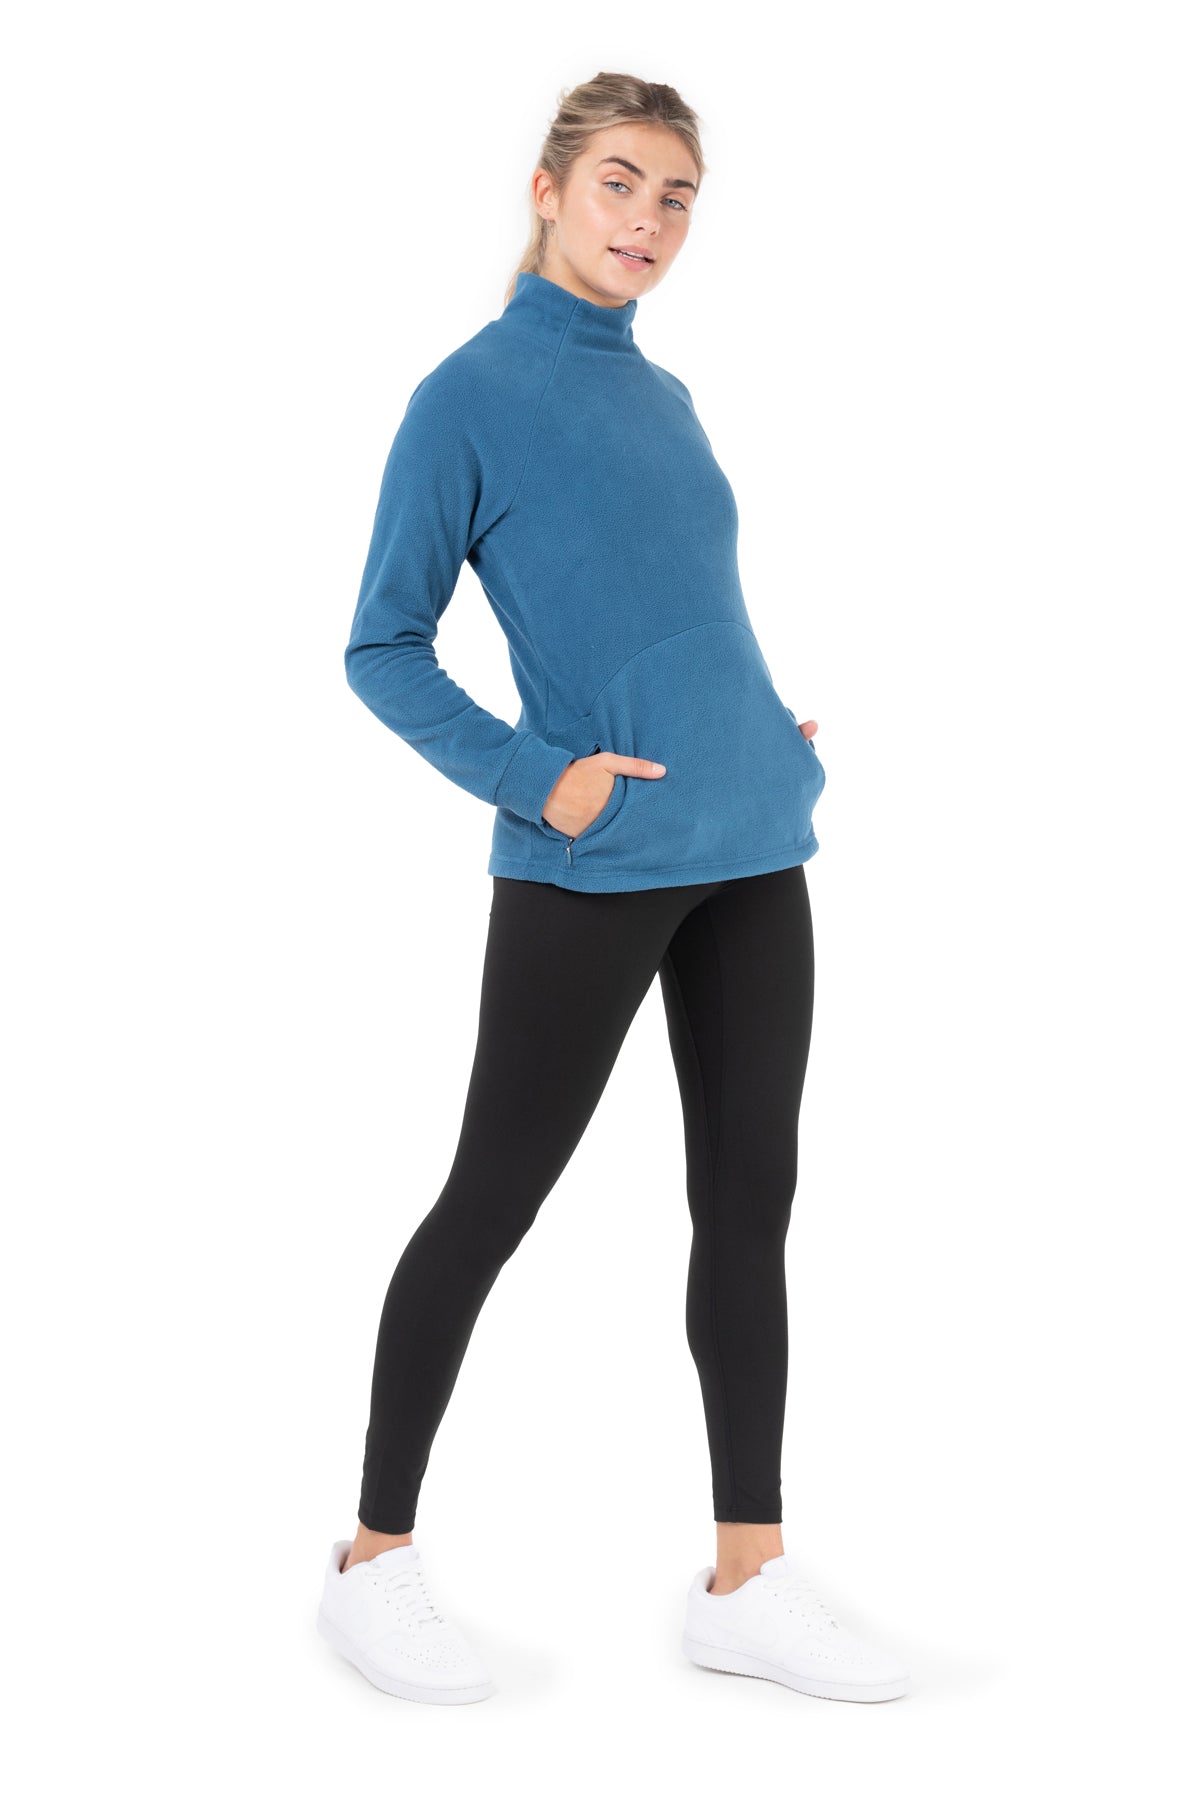 Kyodan Athletic Leggings - Size Small – The Bargain Boutique